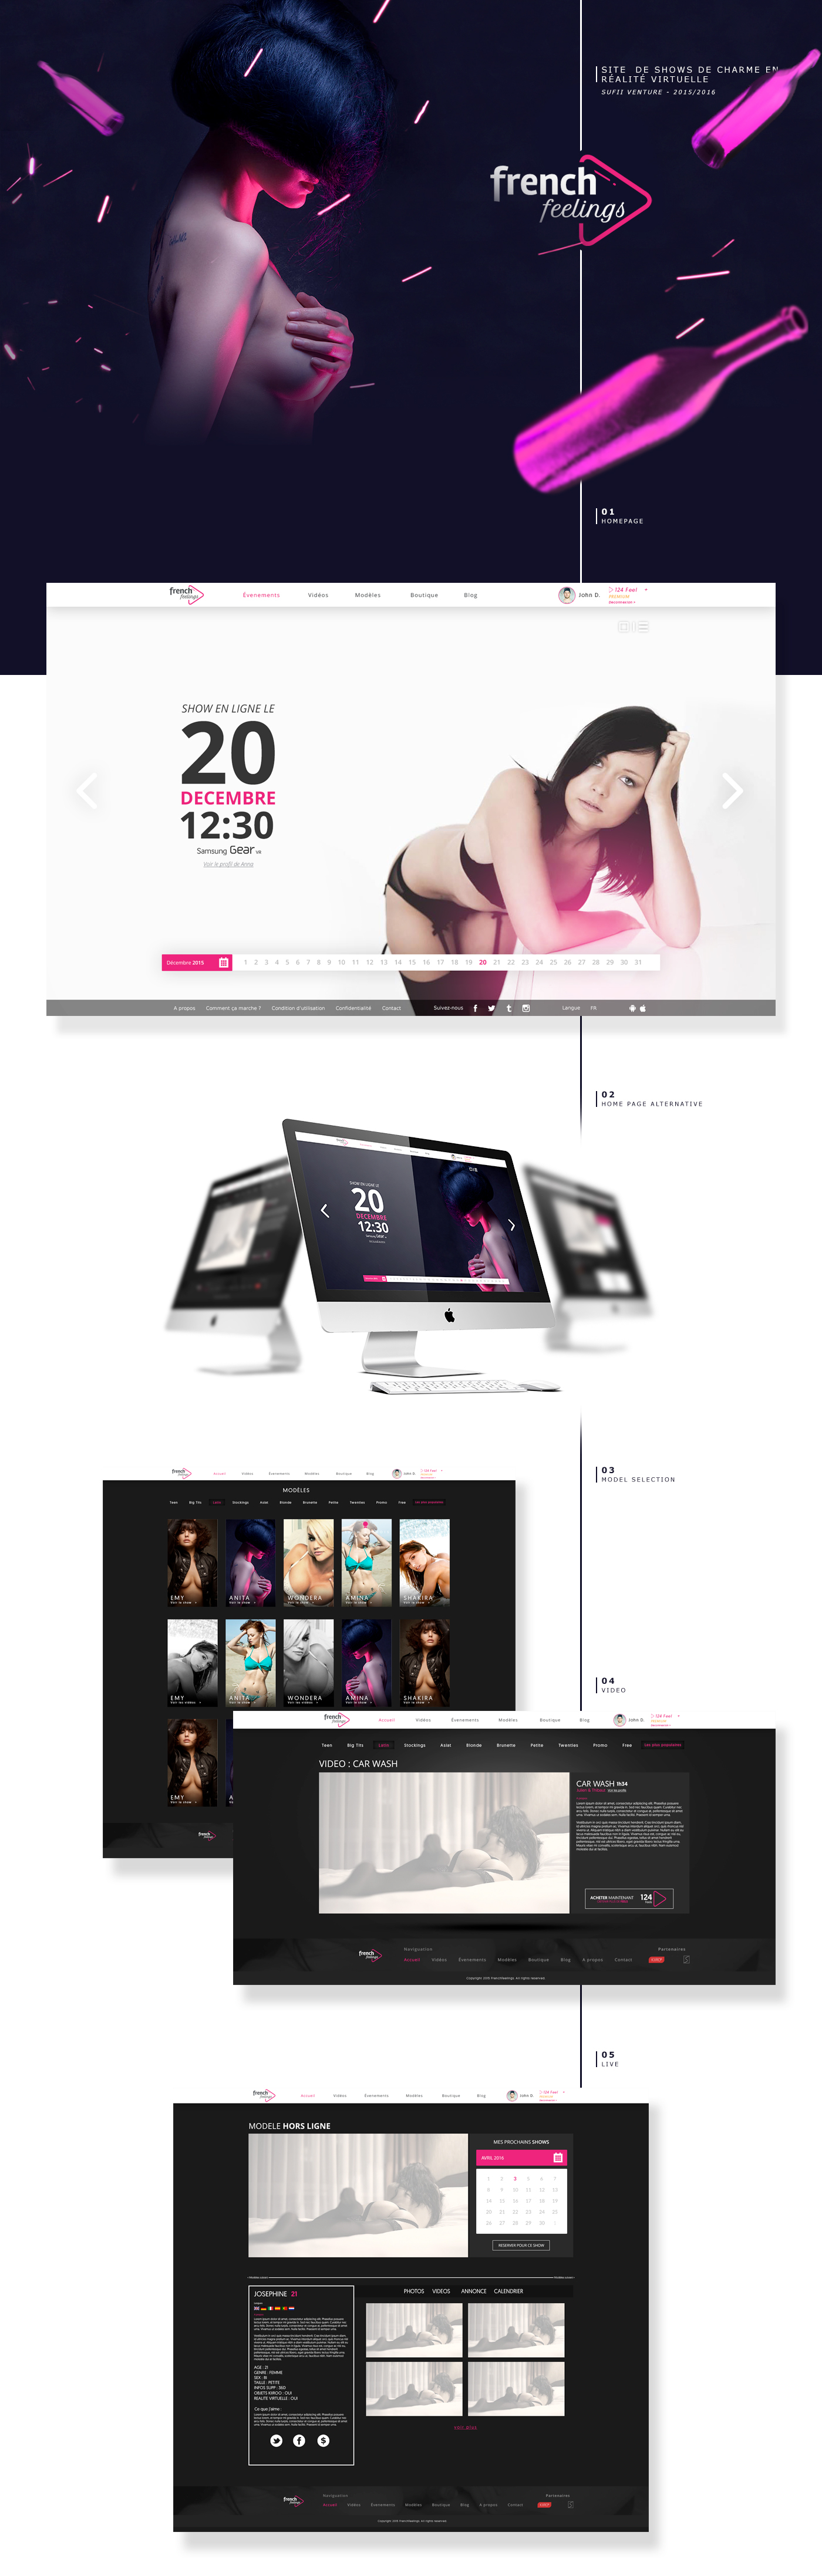 sexy girl feelings French pink Webdesign screens